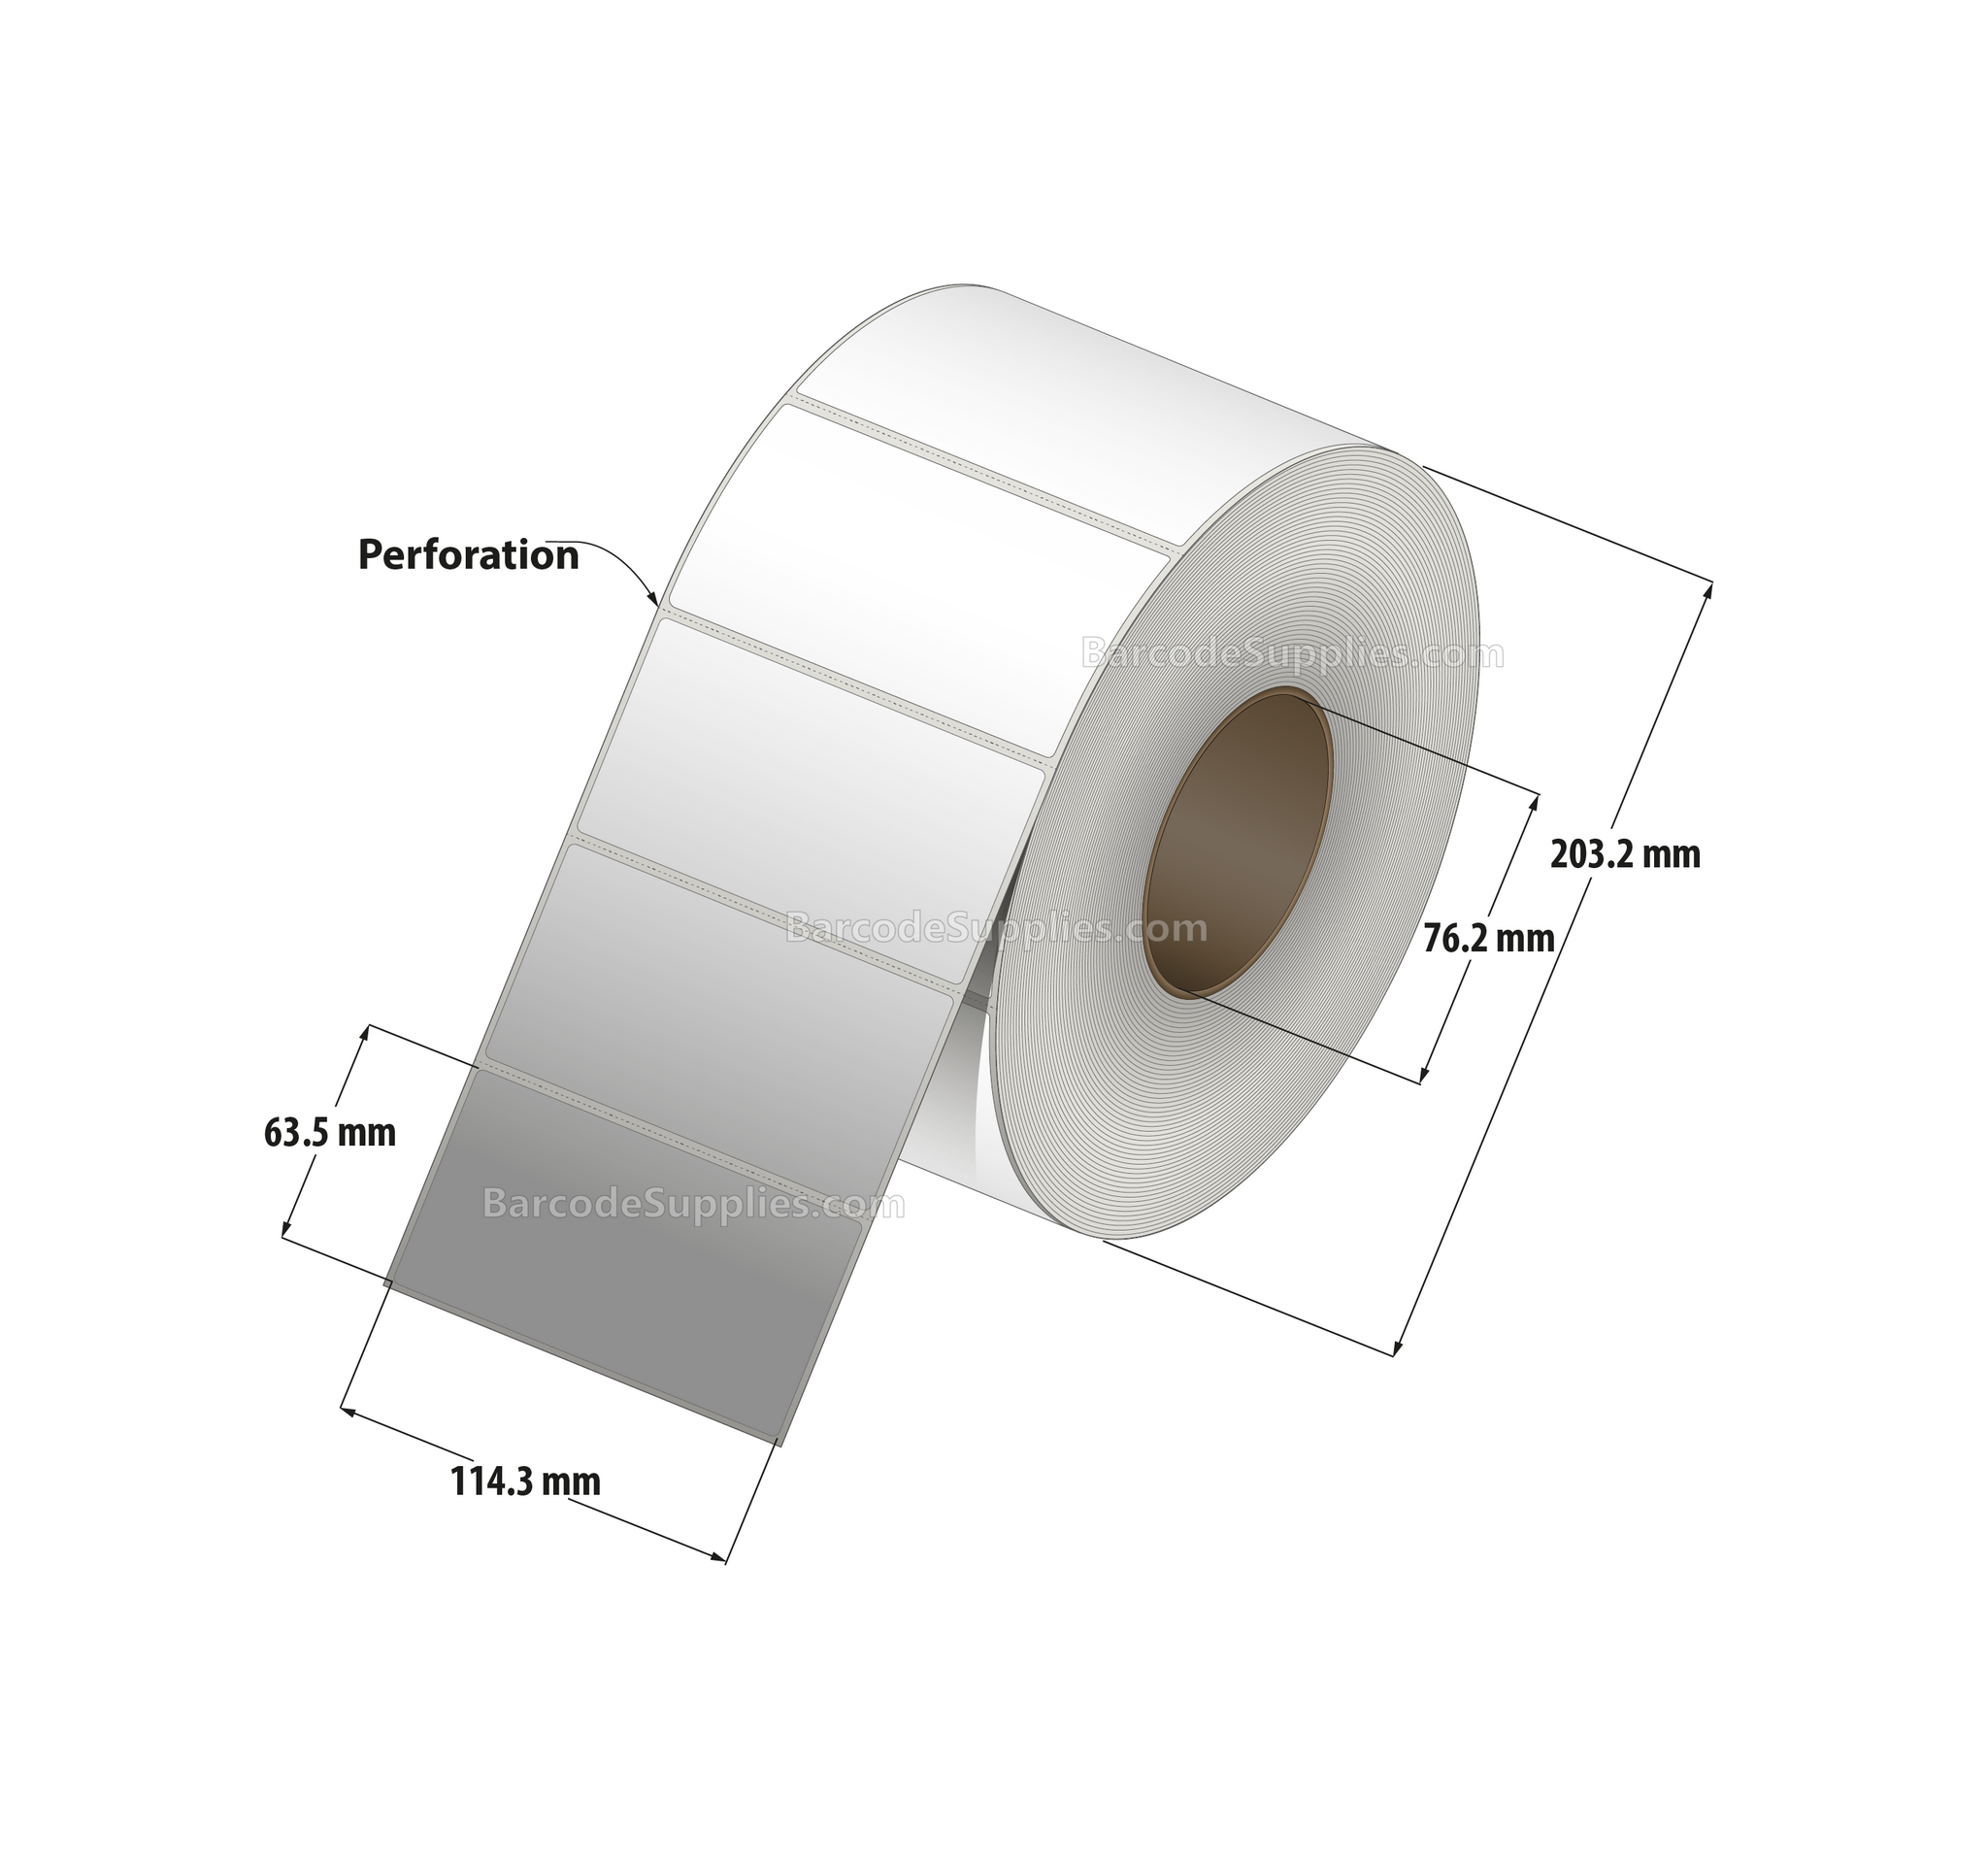 4.5 x 2.5 Thermal Transfer White Labels With Permanent Adhesive - Perforated - 2500 Labels Per Roll - Carton Of 4 Rolls - 10000 Labels Total - MPN: RT-45-25-2500-3